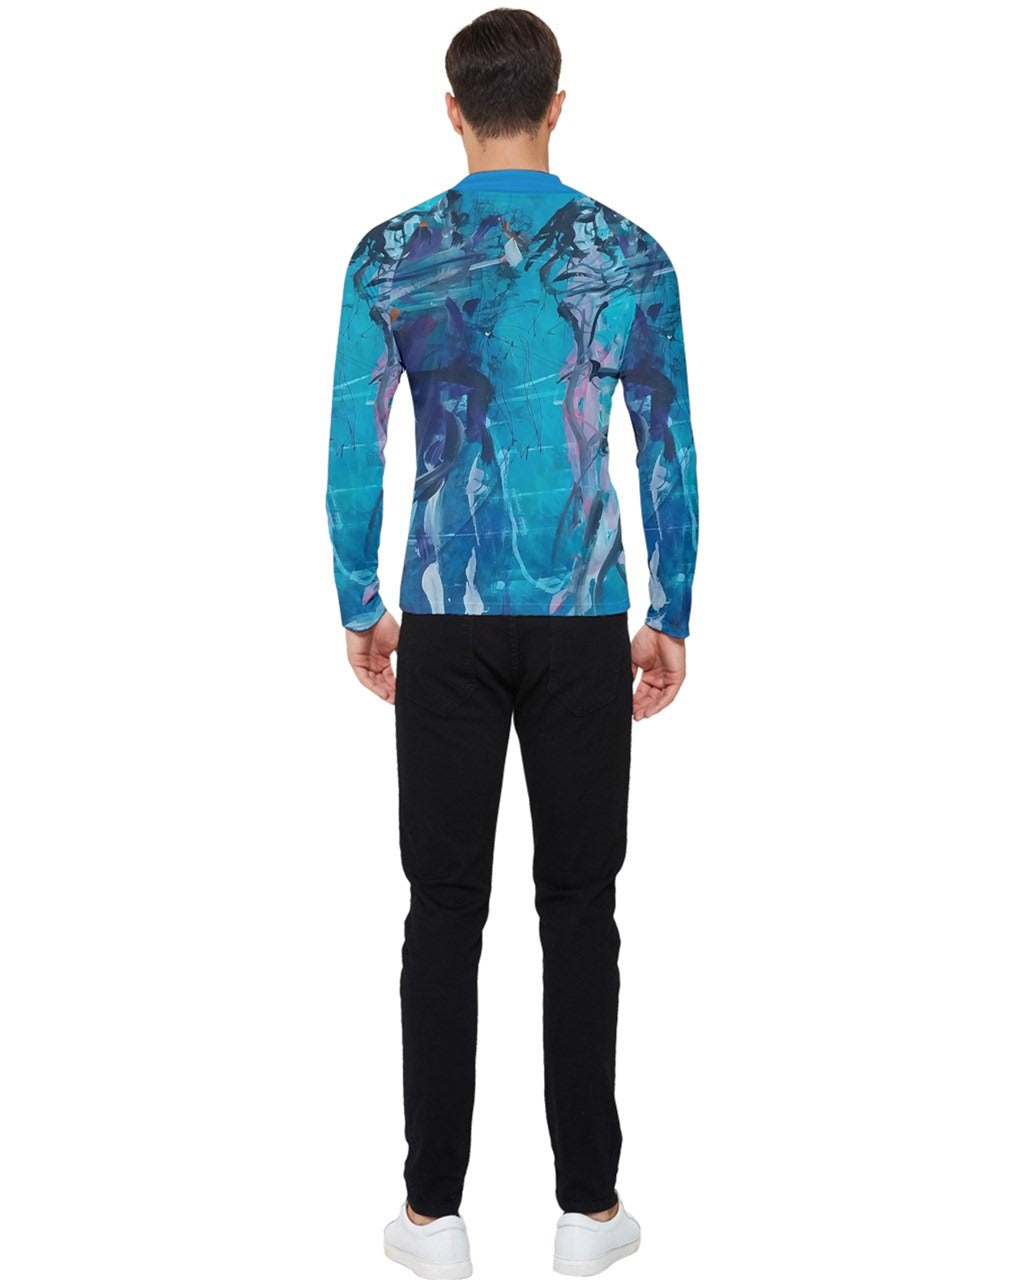 Back view  of a vibrant men's  rash-gautrd featuring original artwork by Leeorah. The design bursts with a kaleidoscope of colors, blending seamlessly to create a captivating visual display. Available in a range of sizes to suit all body types, this  rash gaurd is a bold statement piece for any wardrobe